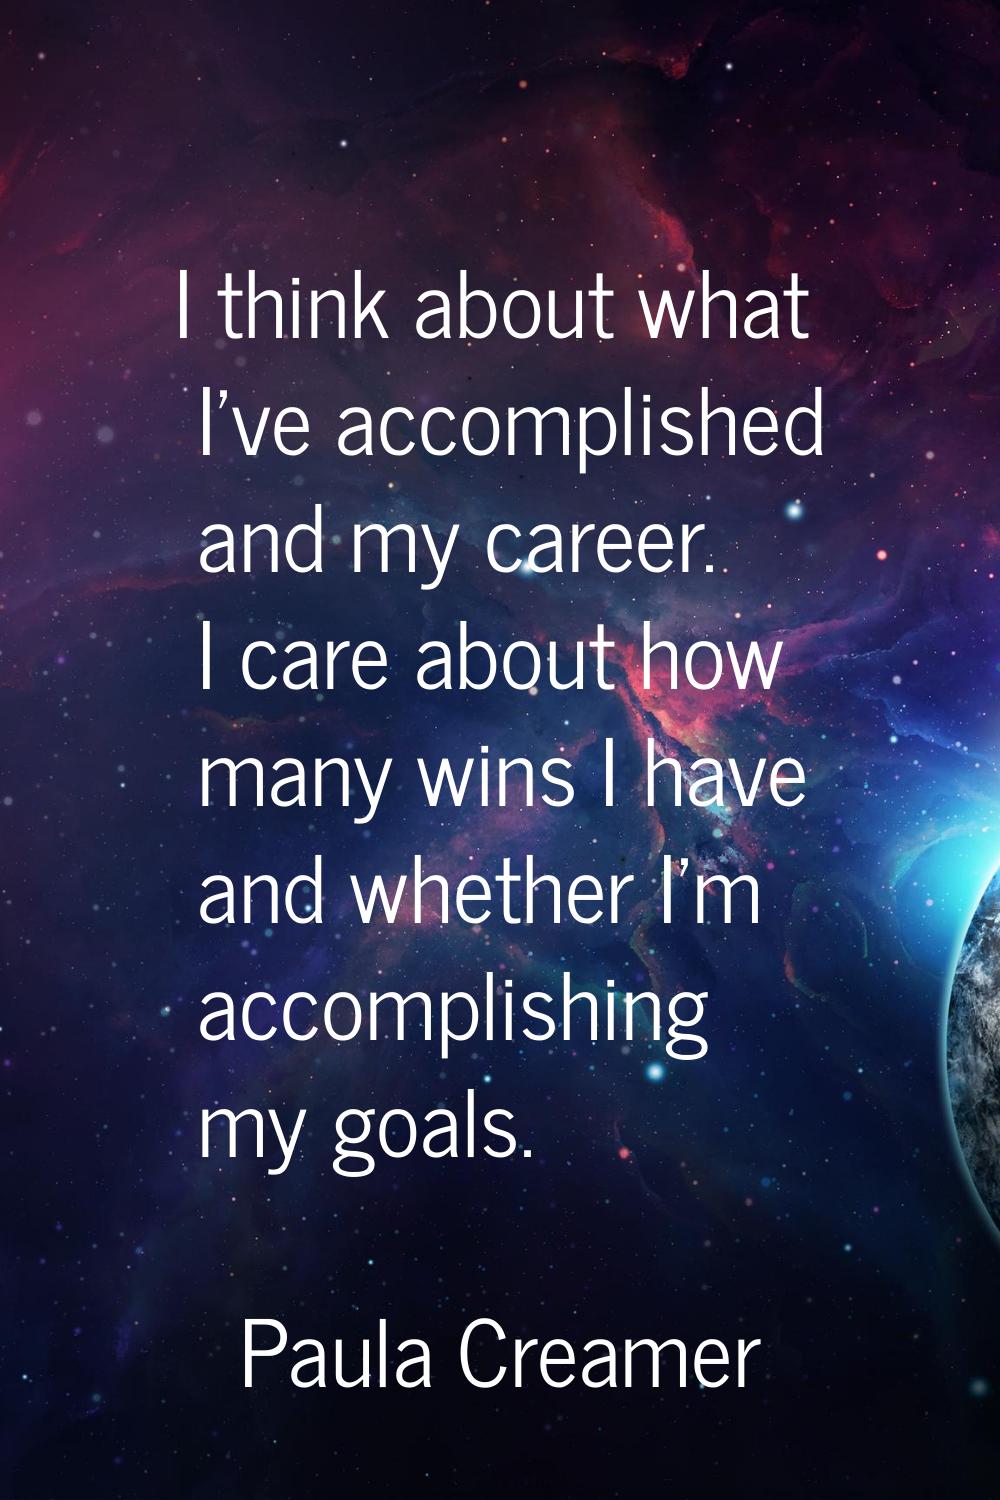 I think about what I've accomplished and my career. I care about how many wins I have and whether I